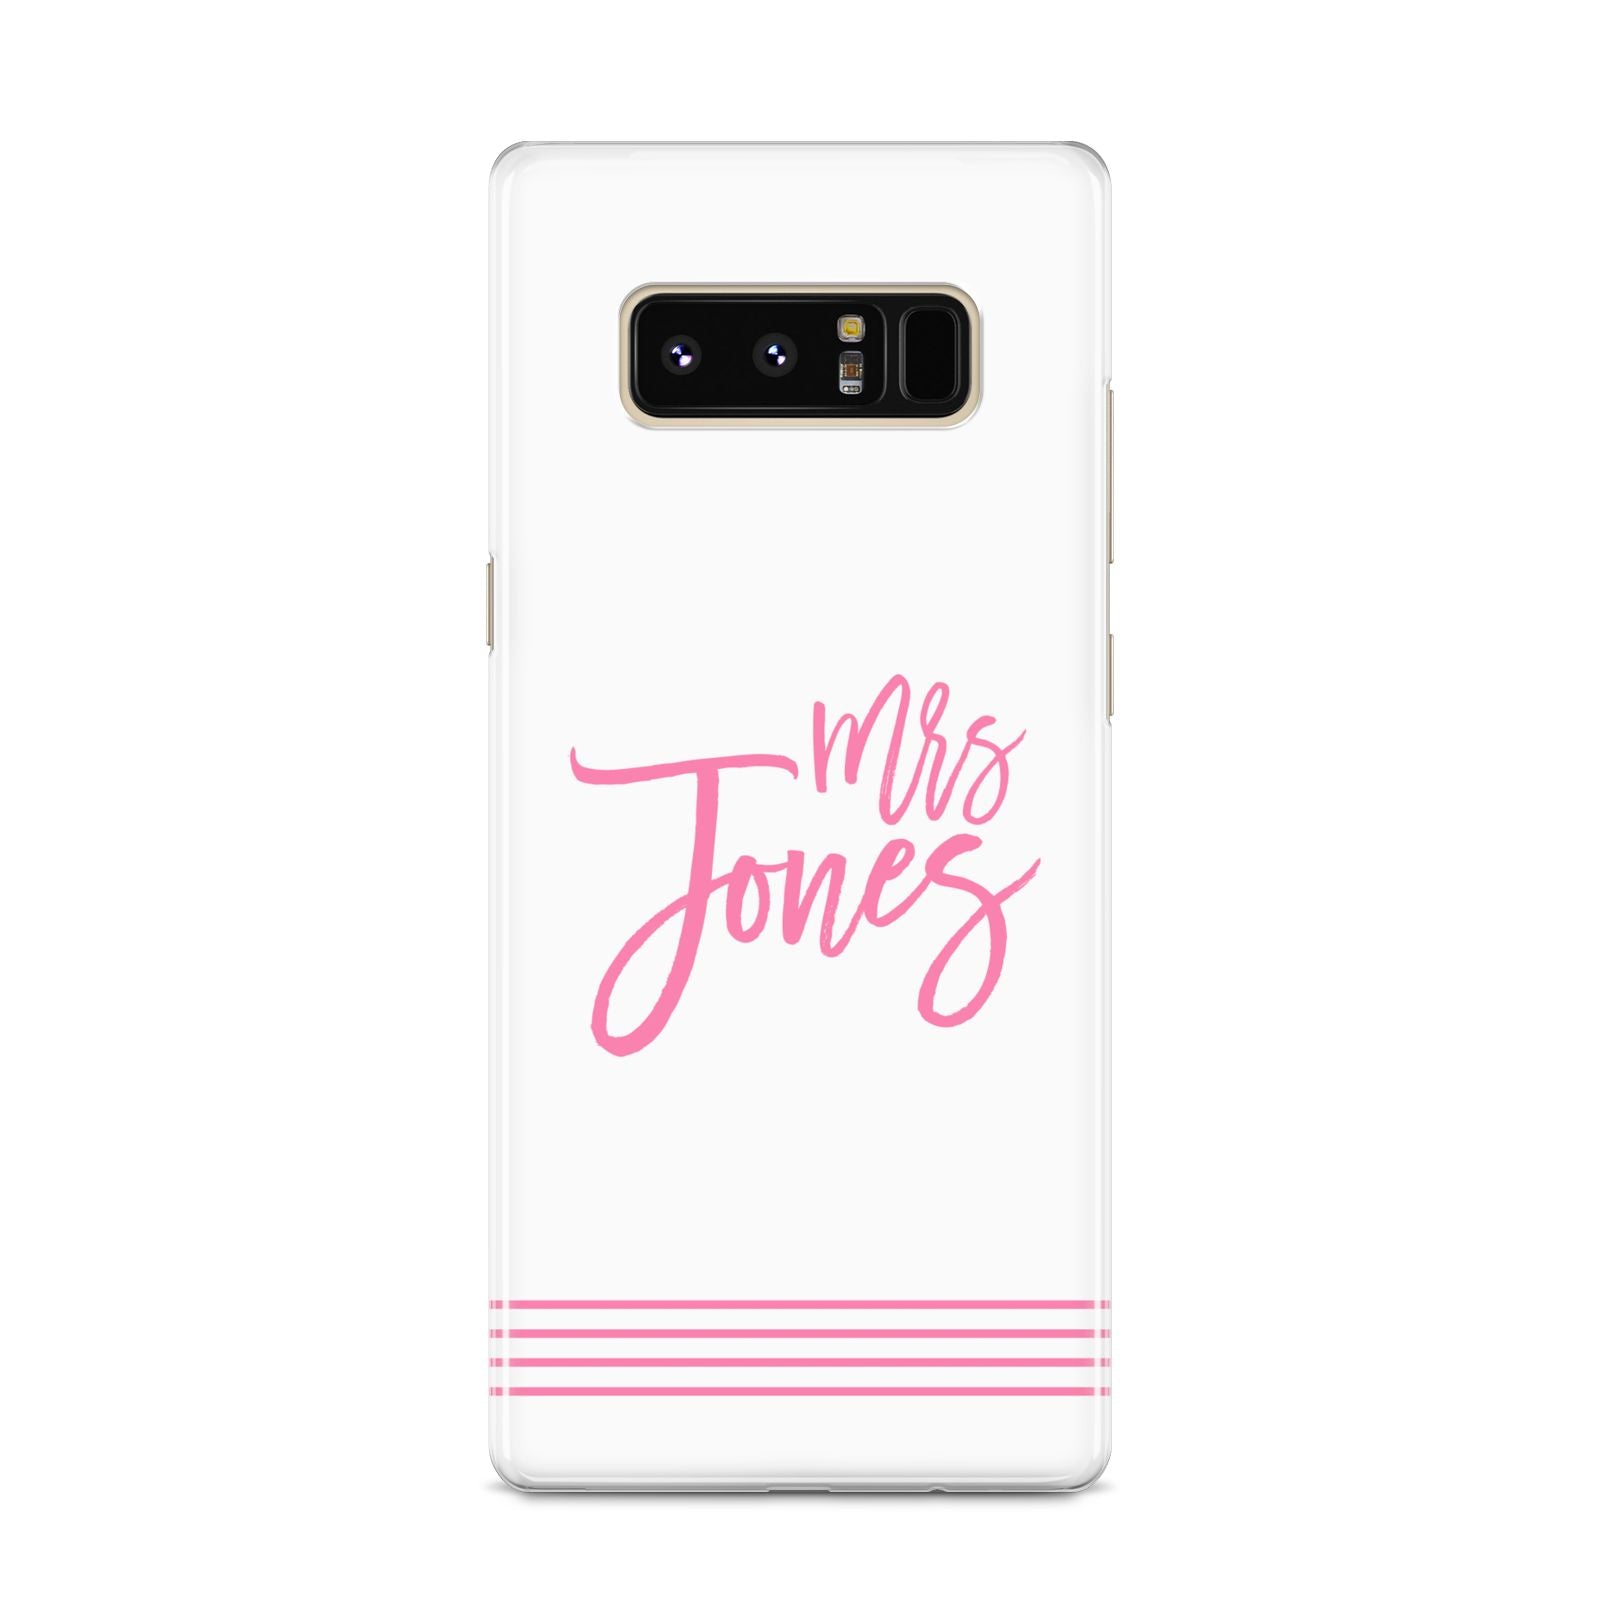 Personalised Hers Samsung Galaxy S8 Case